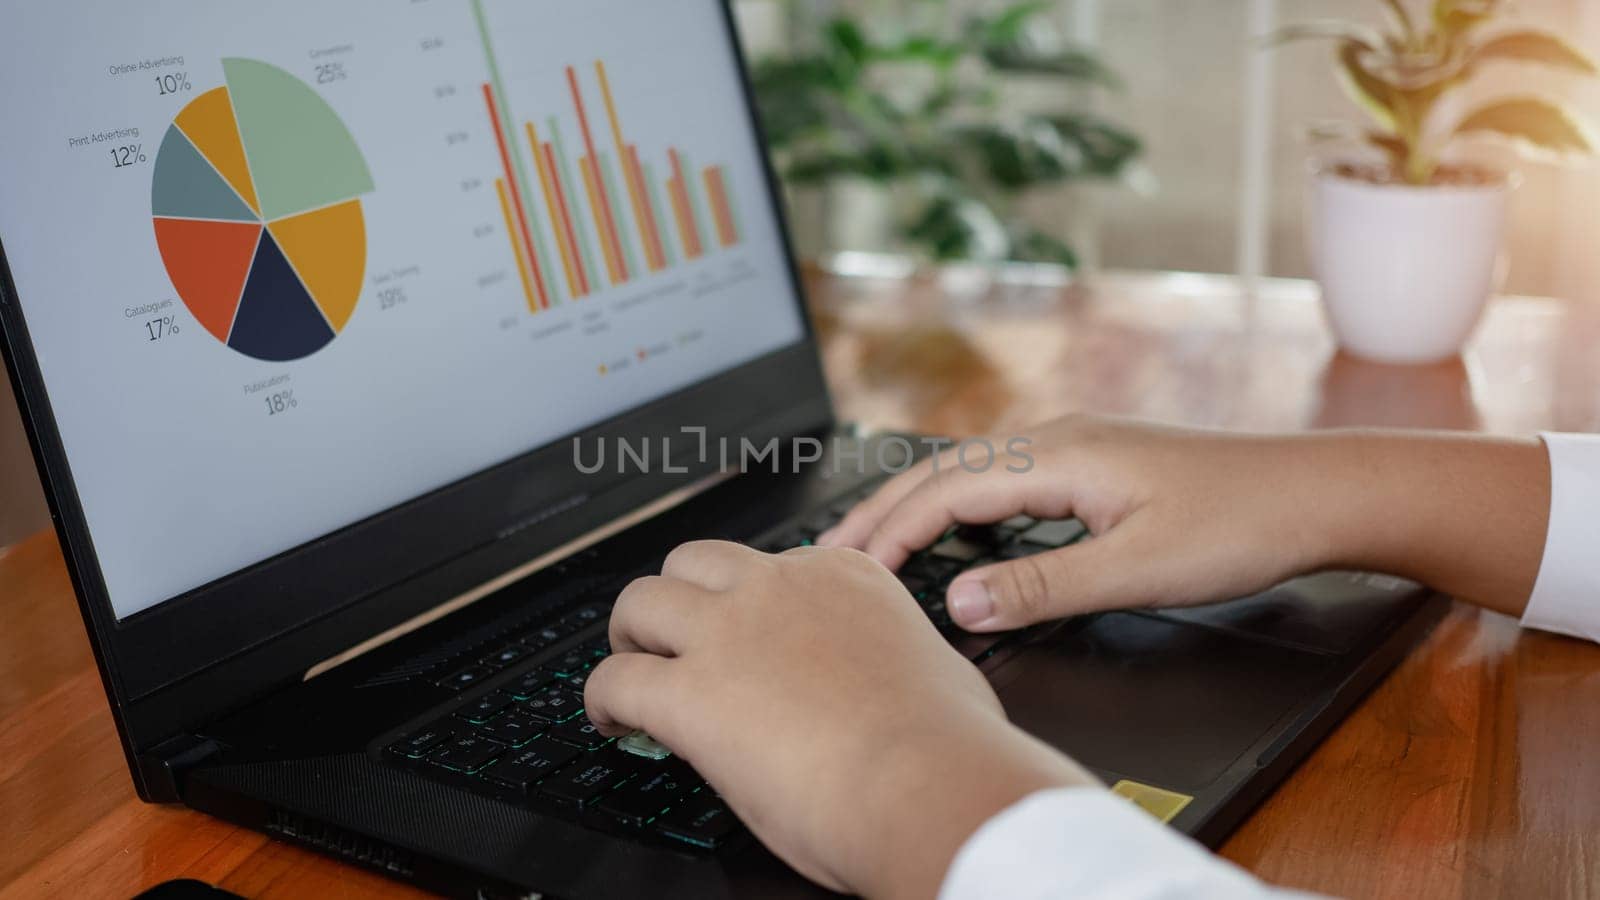 Human hand working on computer. business concept and communication technology by Unimages2527